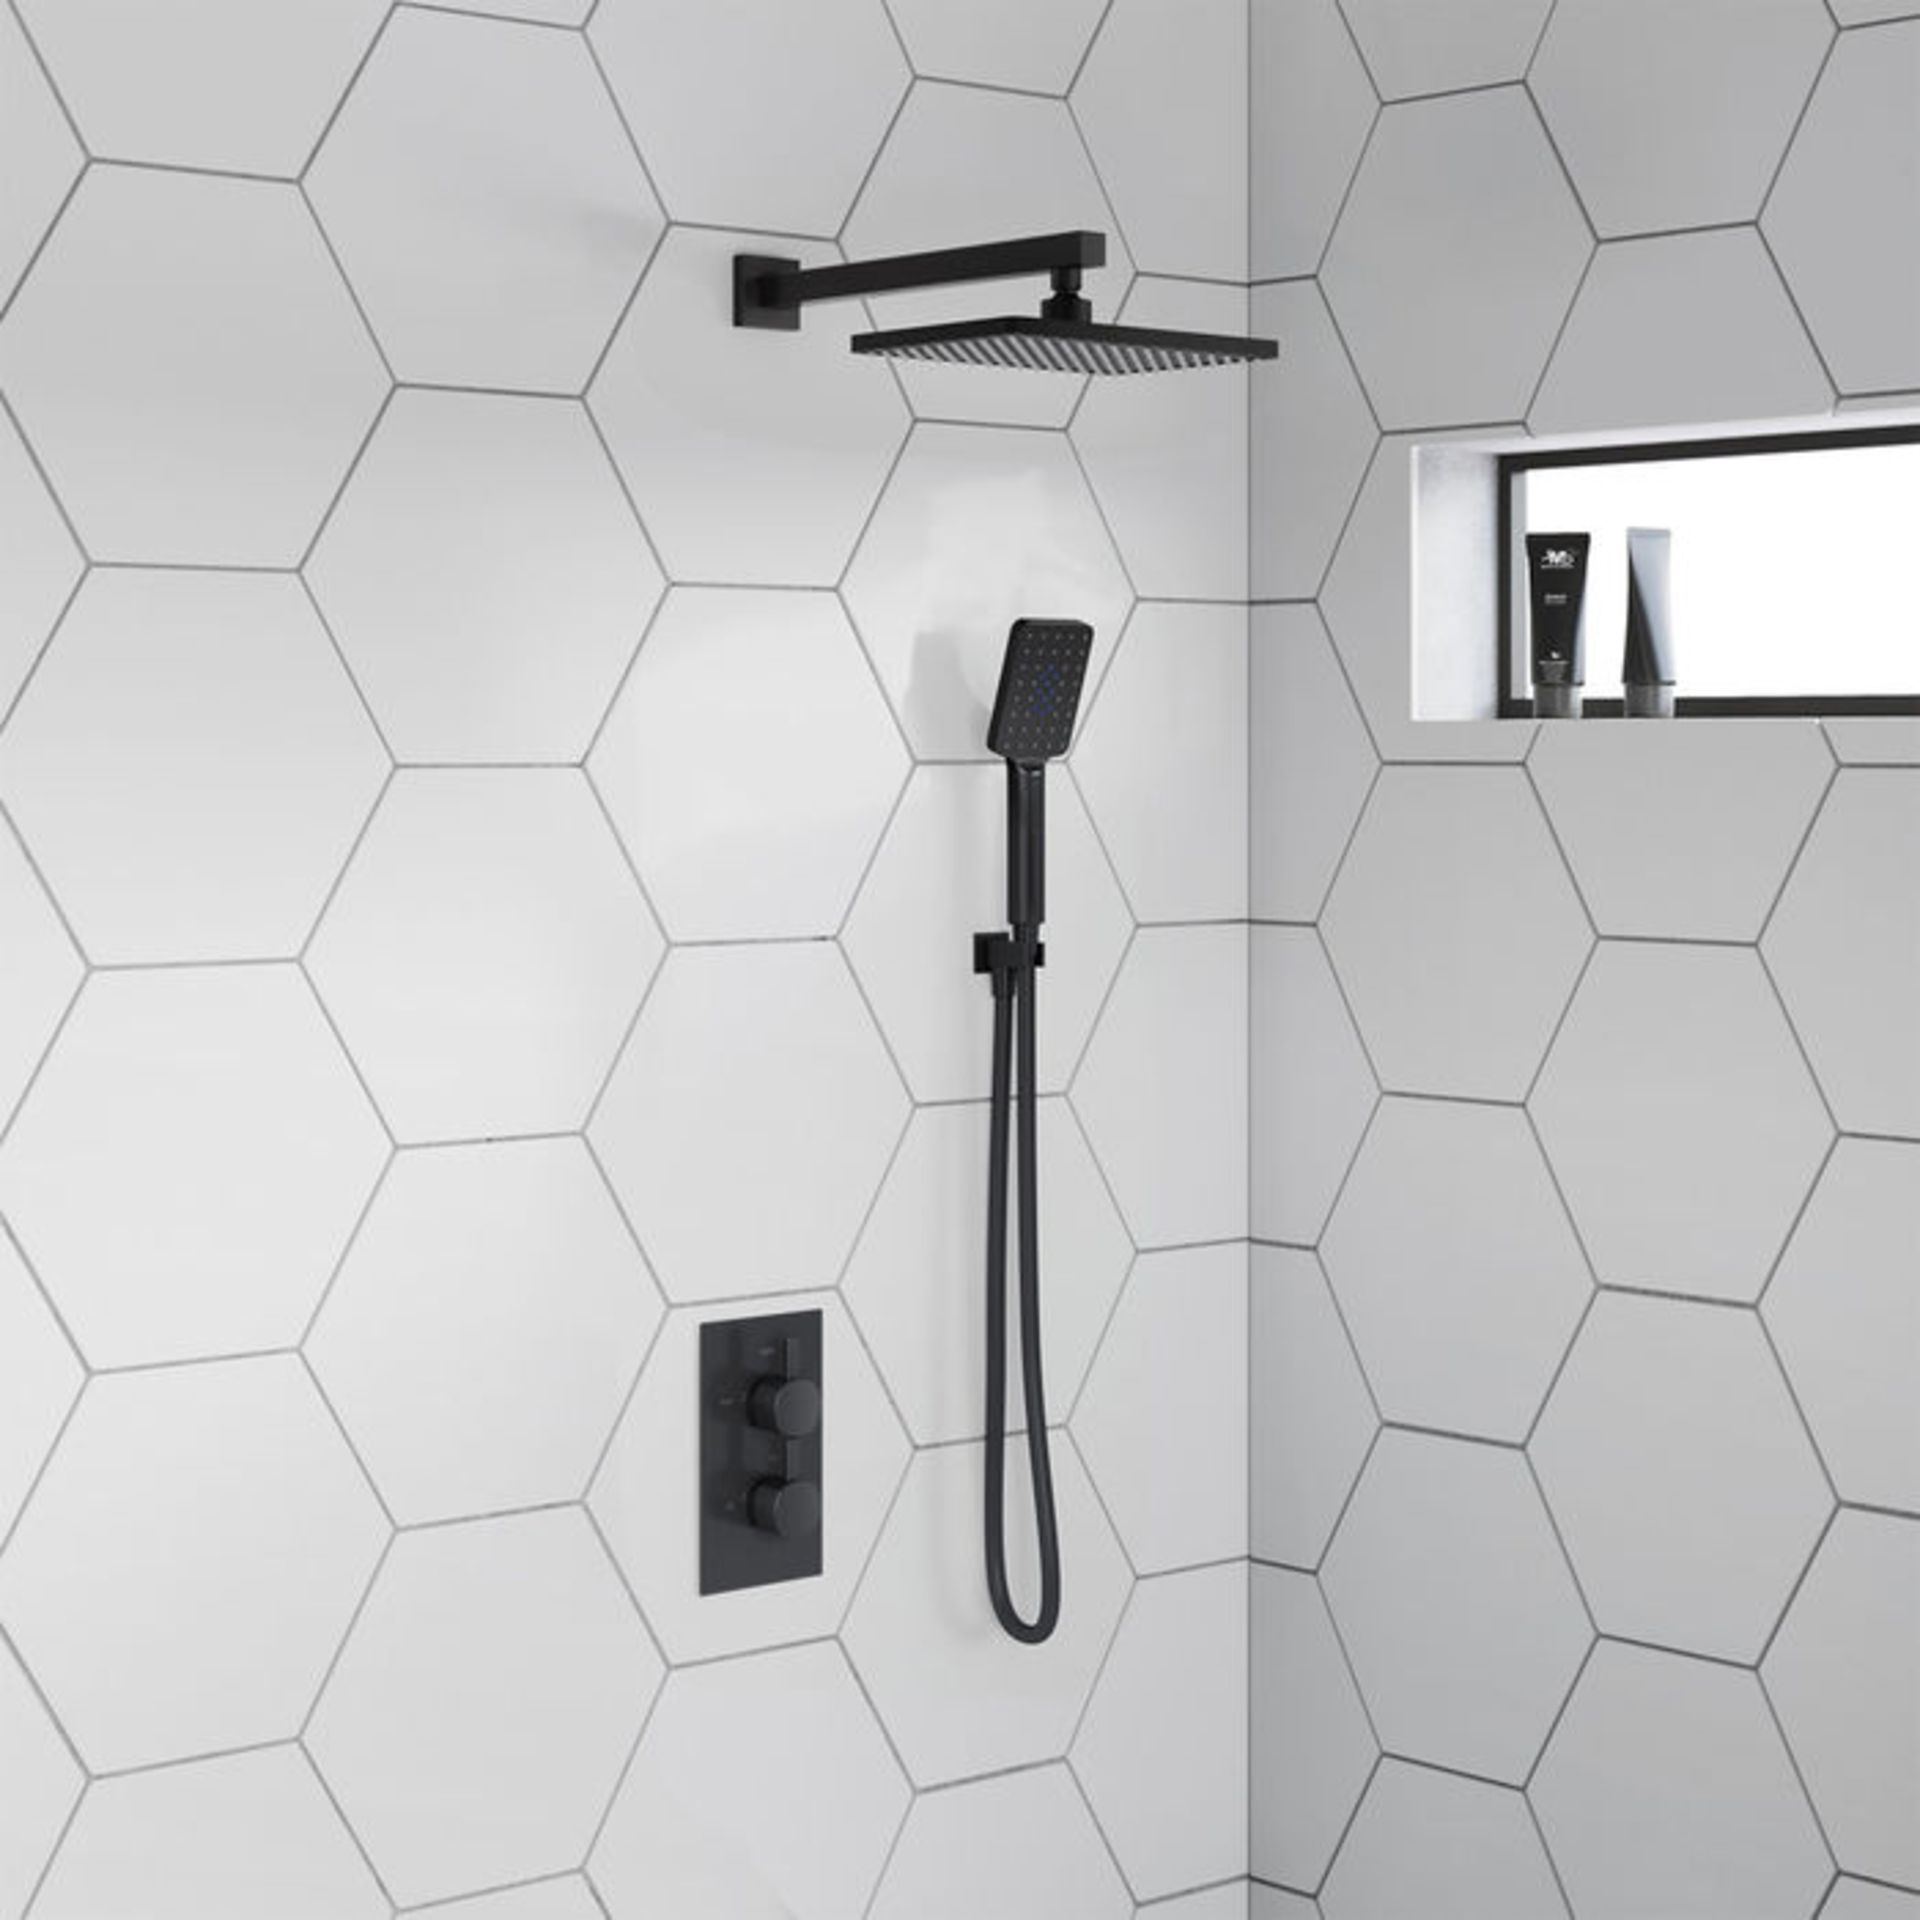 (PT65) Square Concealed Thermostatic Mixer Shower Kit & Large Head, Matte Black. Premium on trend - Image 3 of 5